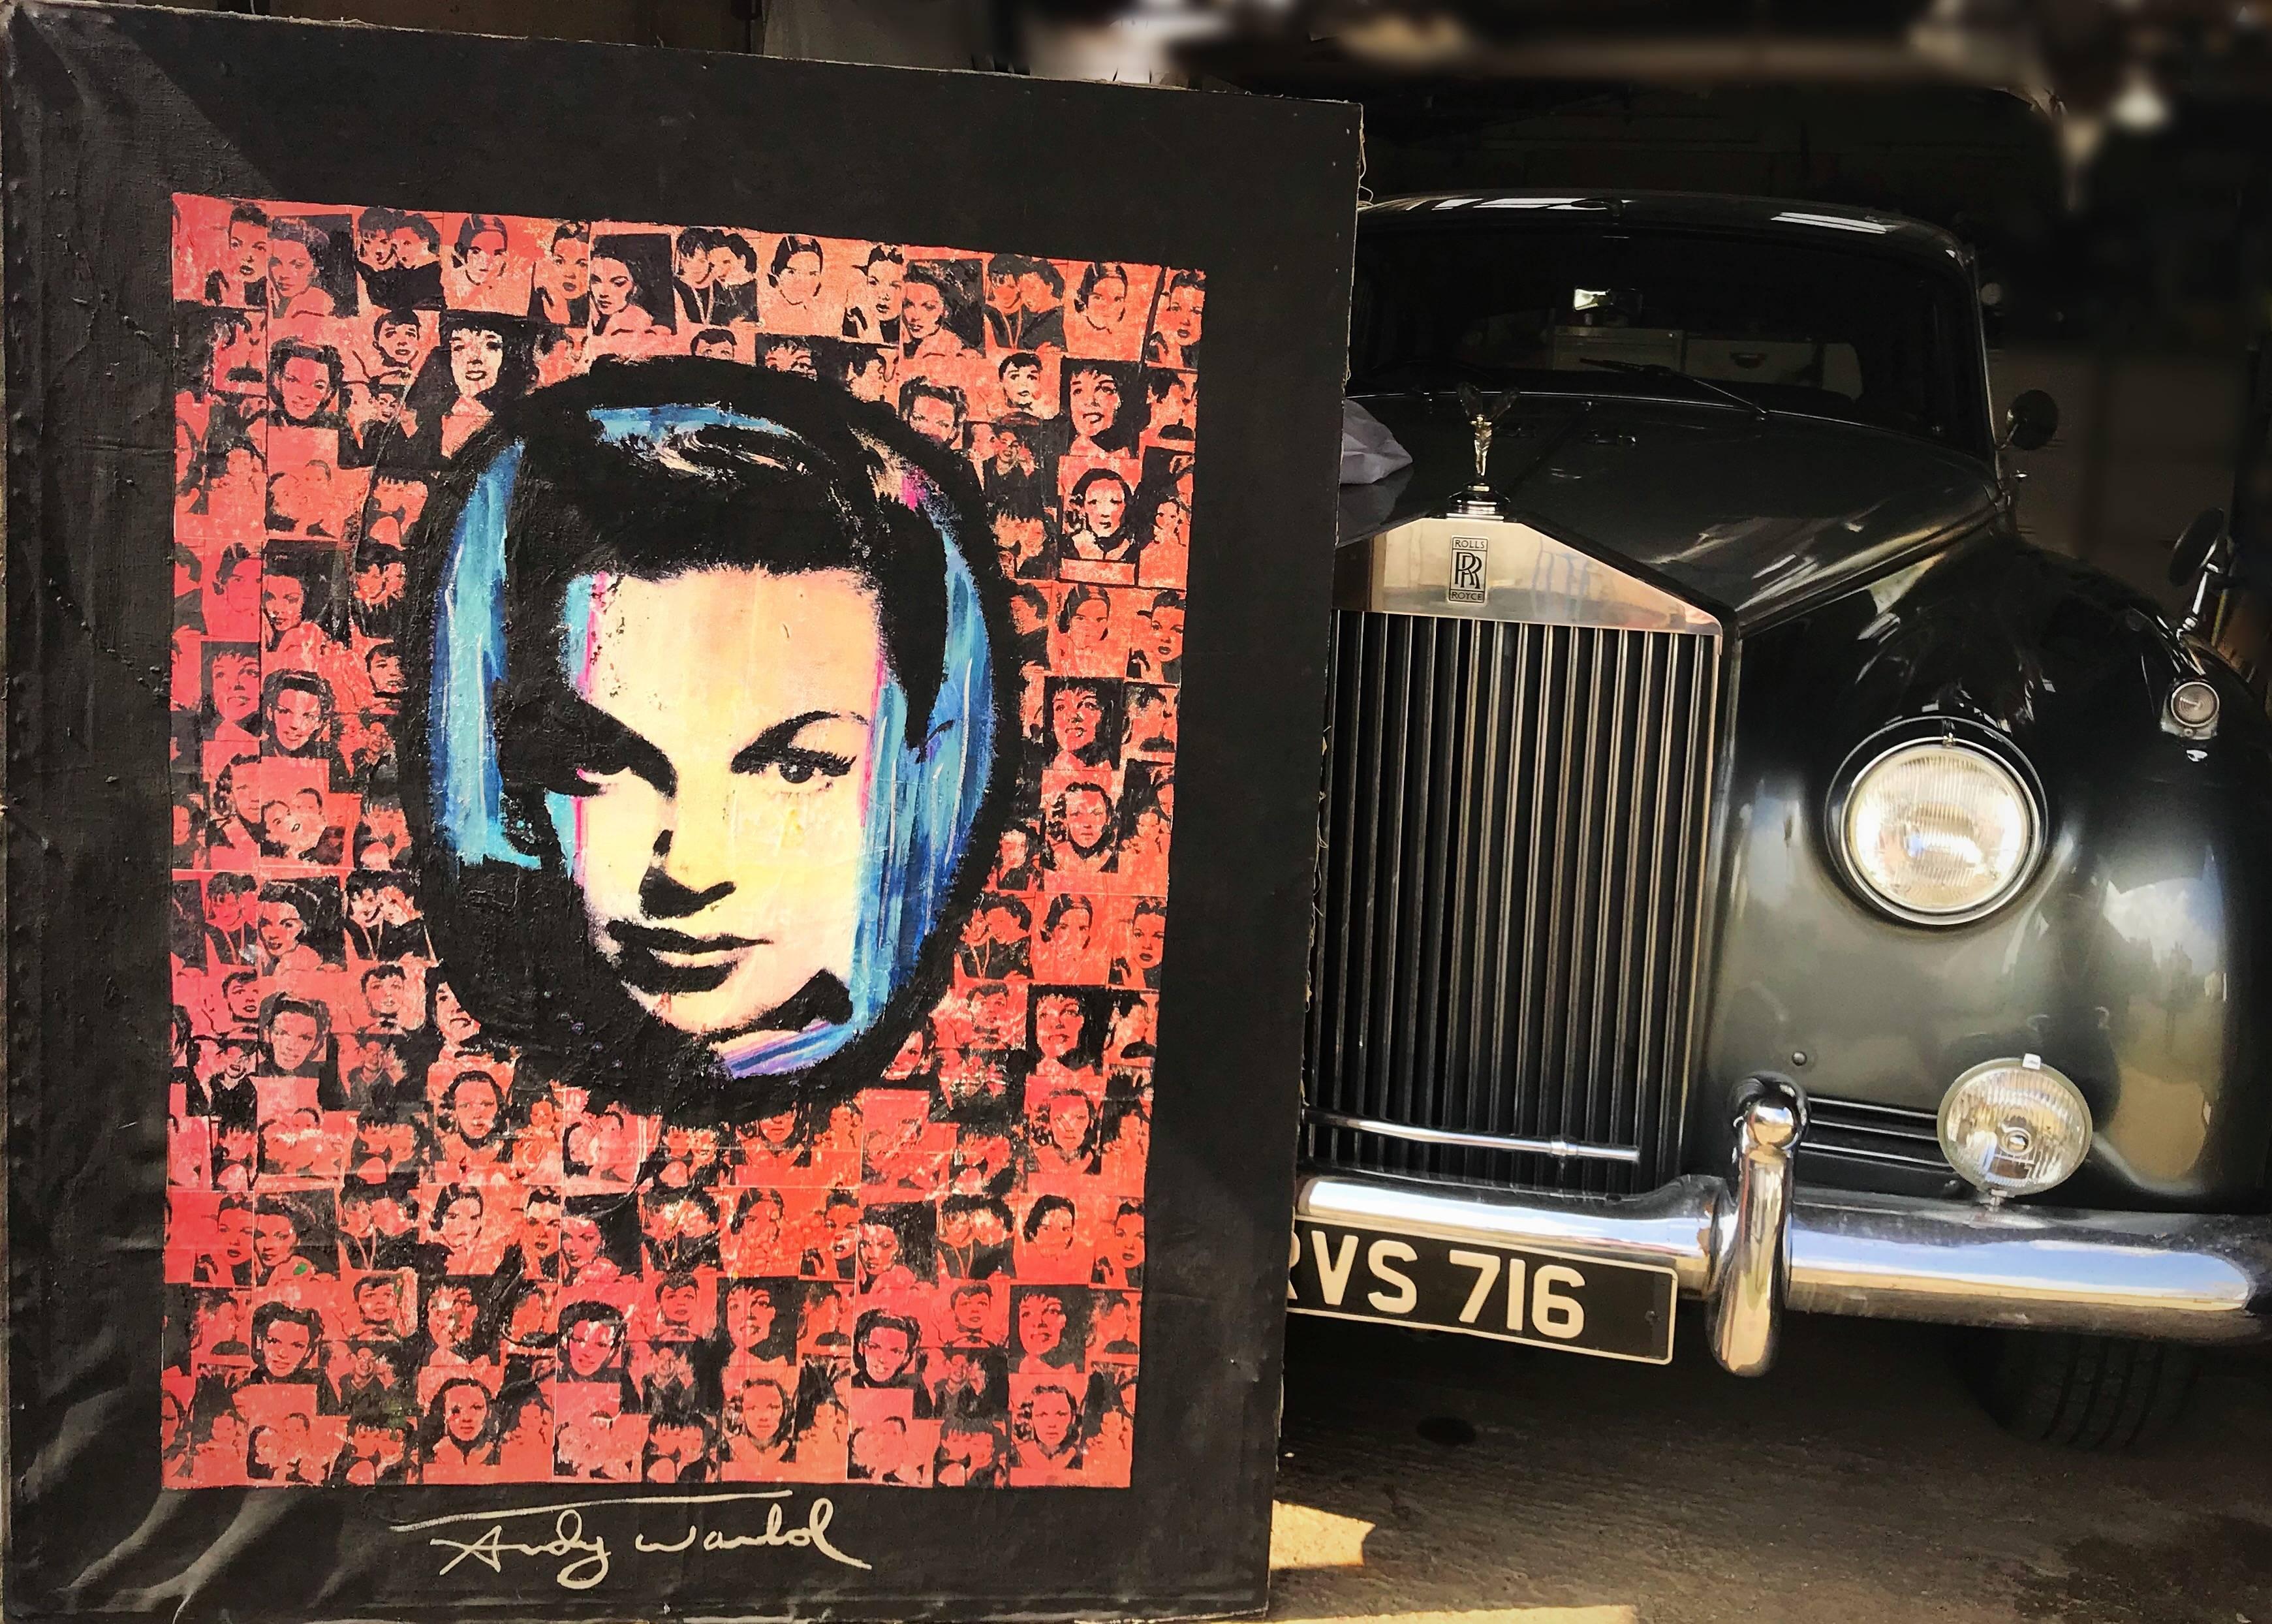 PIETRO PSAIER Sceen print bearing Andy Warhol signature 

SUBJECT: Judy Garland and Liza Minnelli
MEDIUM: Screenprint on Canvas
YEAR: 1980
SIGNED: Andy Warhol (unverified, see details below)

ANDY WARHOL FACTORY STAMP TO VERSO...
hand